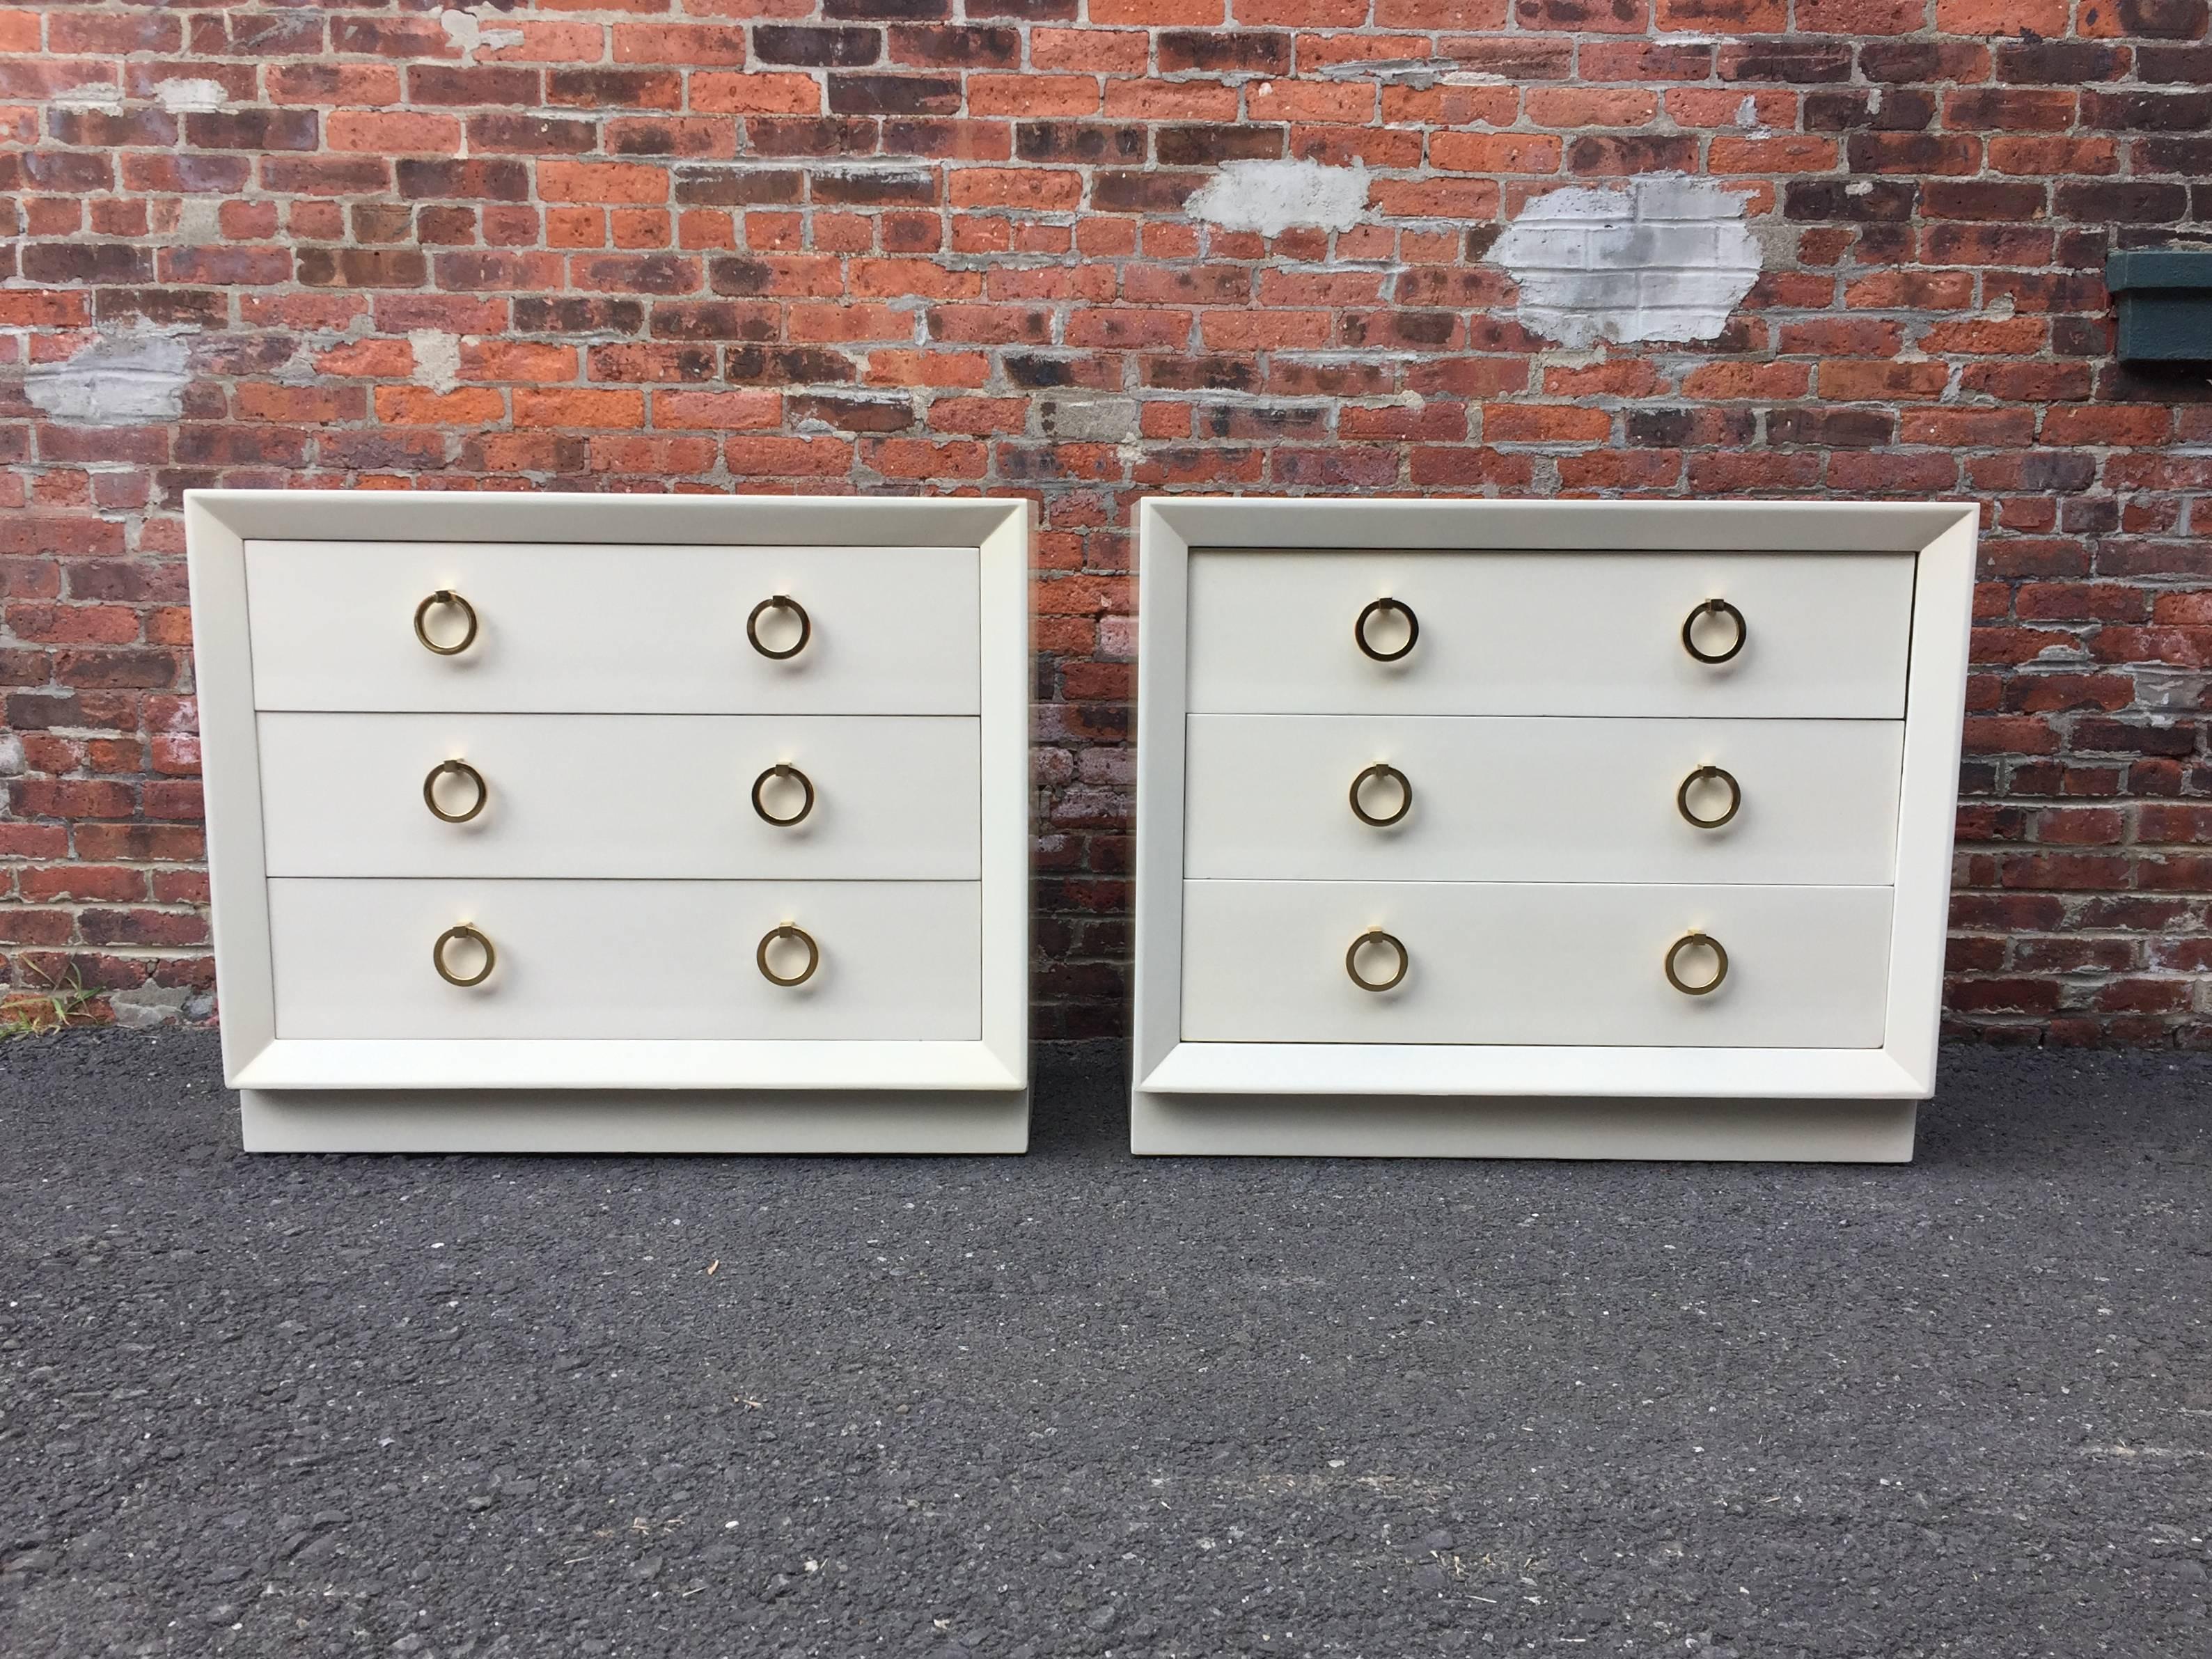 Pair of Terence Harold Robsjohn-Gibbings (1905-1976) dressers for Widdicomb. Deep three drawers with solid brass ring pulls. Plinth base with beveled front edge detail. Small hidden compartment under top drawer for securing valuables, etc. Paper